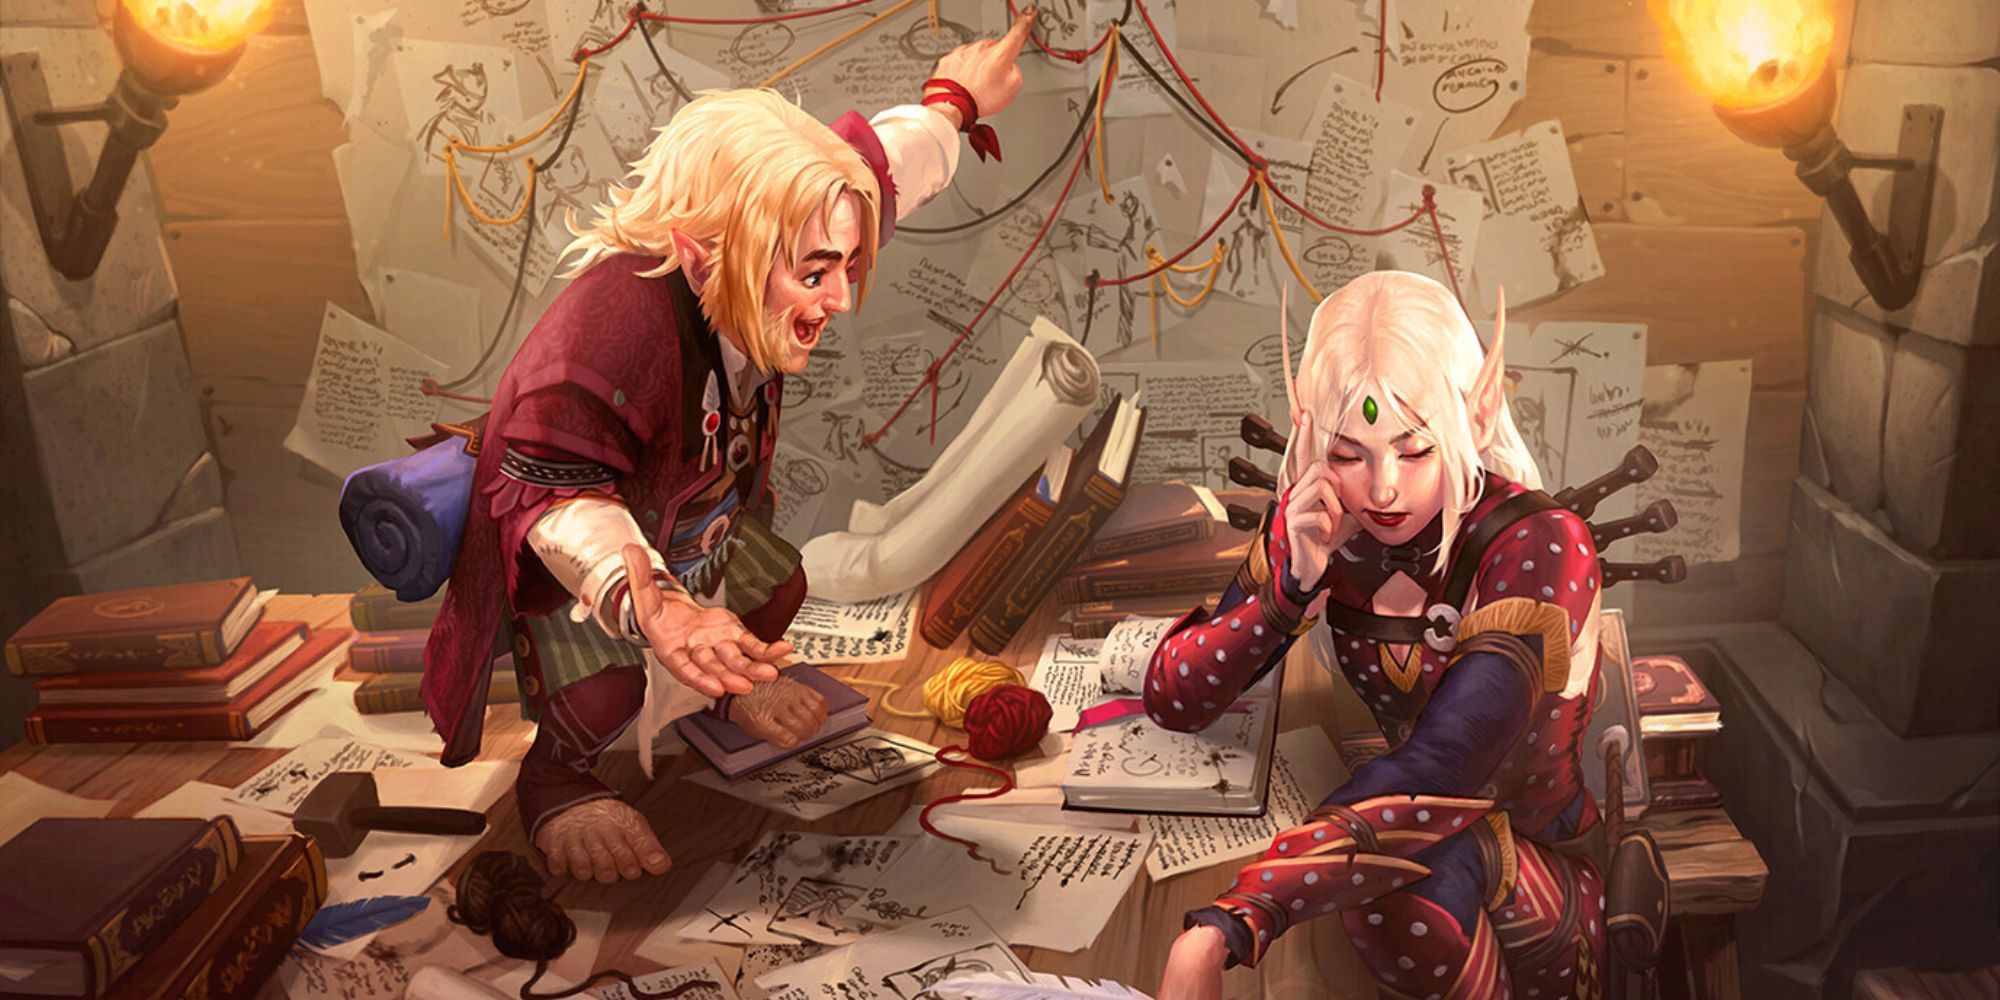 Pathfinder rogue and bard putting a plan together